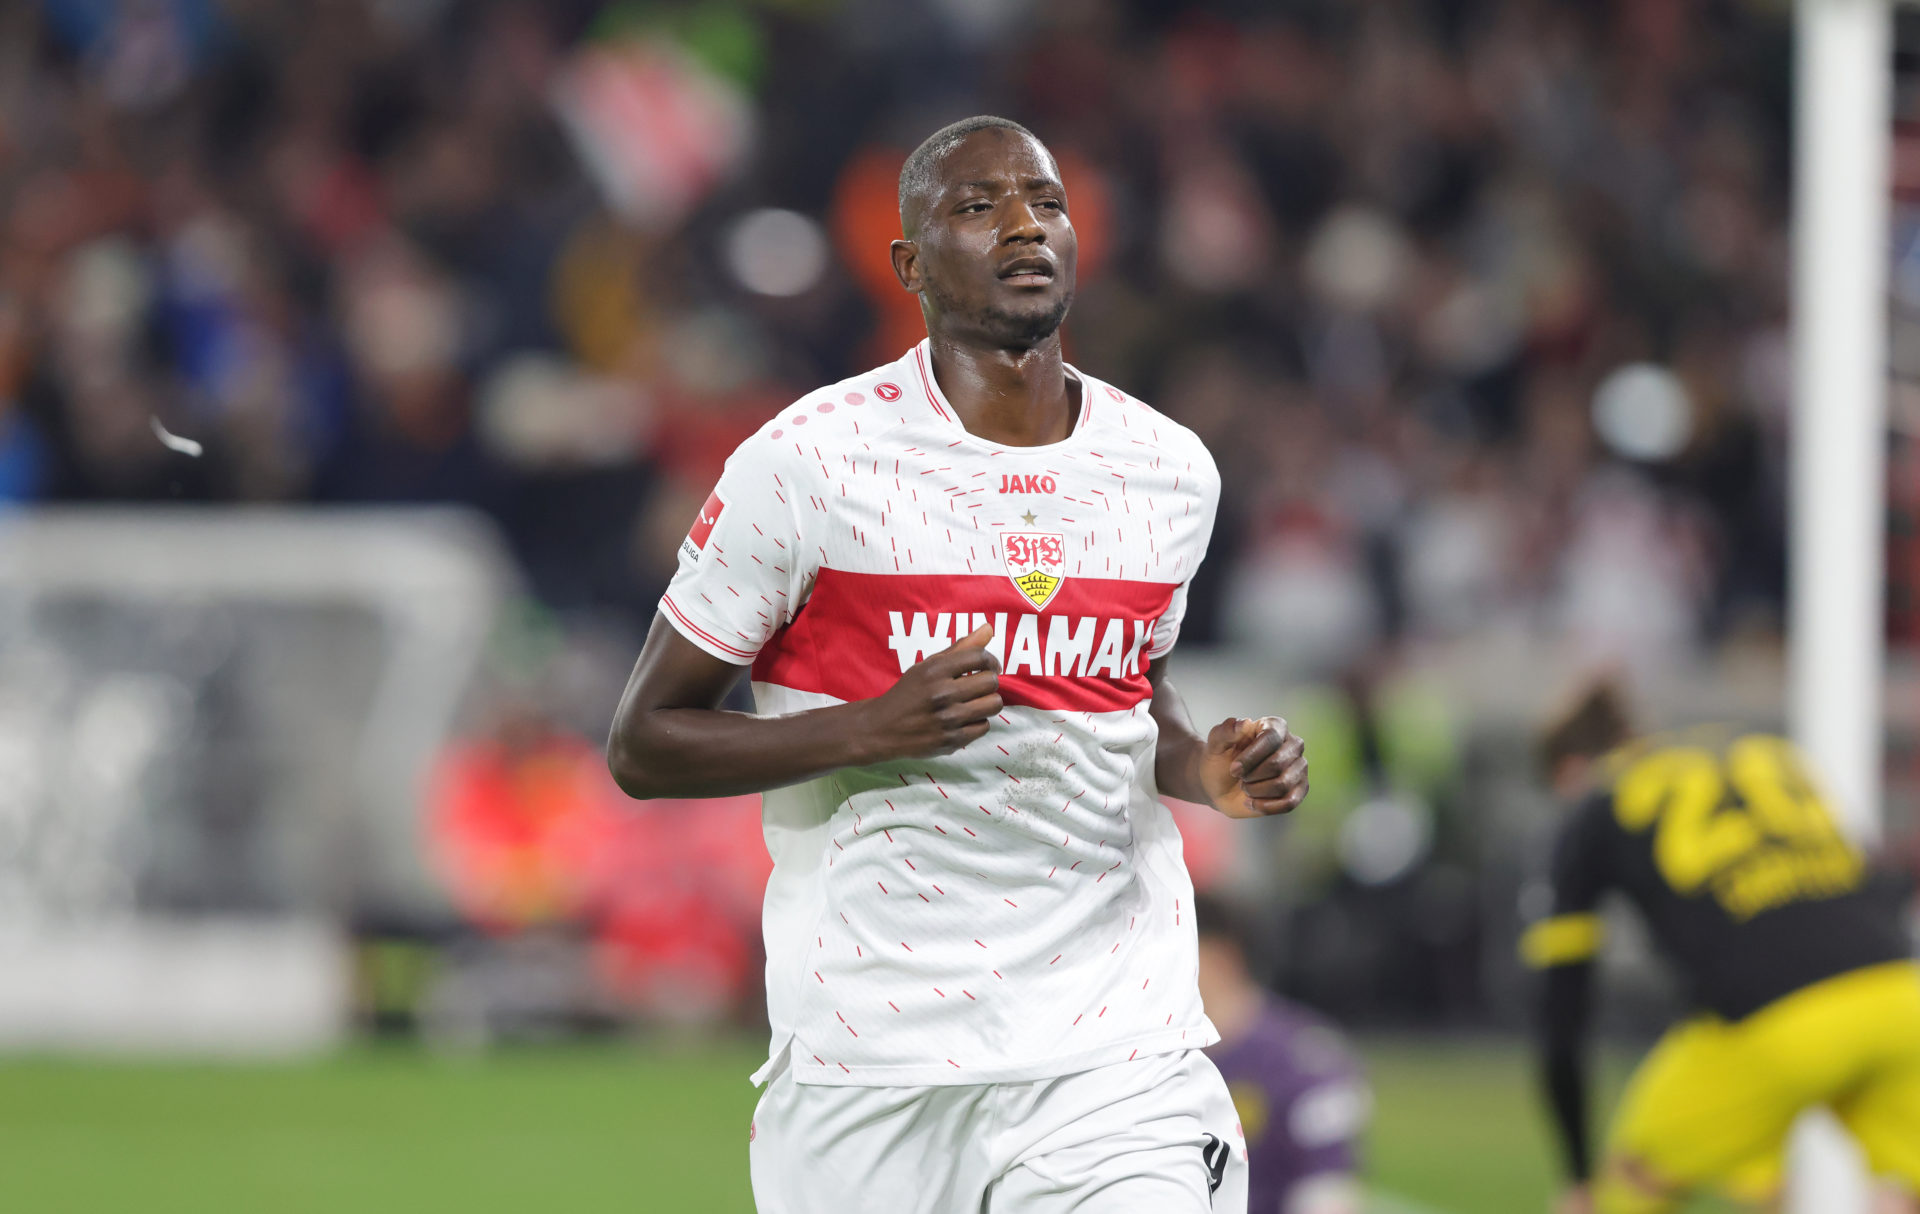 Milan won’t give up the chase for Serhou Guirassy even though he has been called up for AFCON and will miss at least the entire month of January.